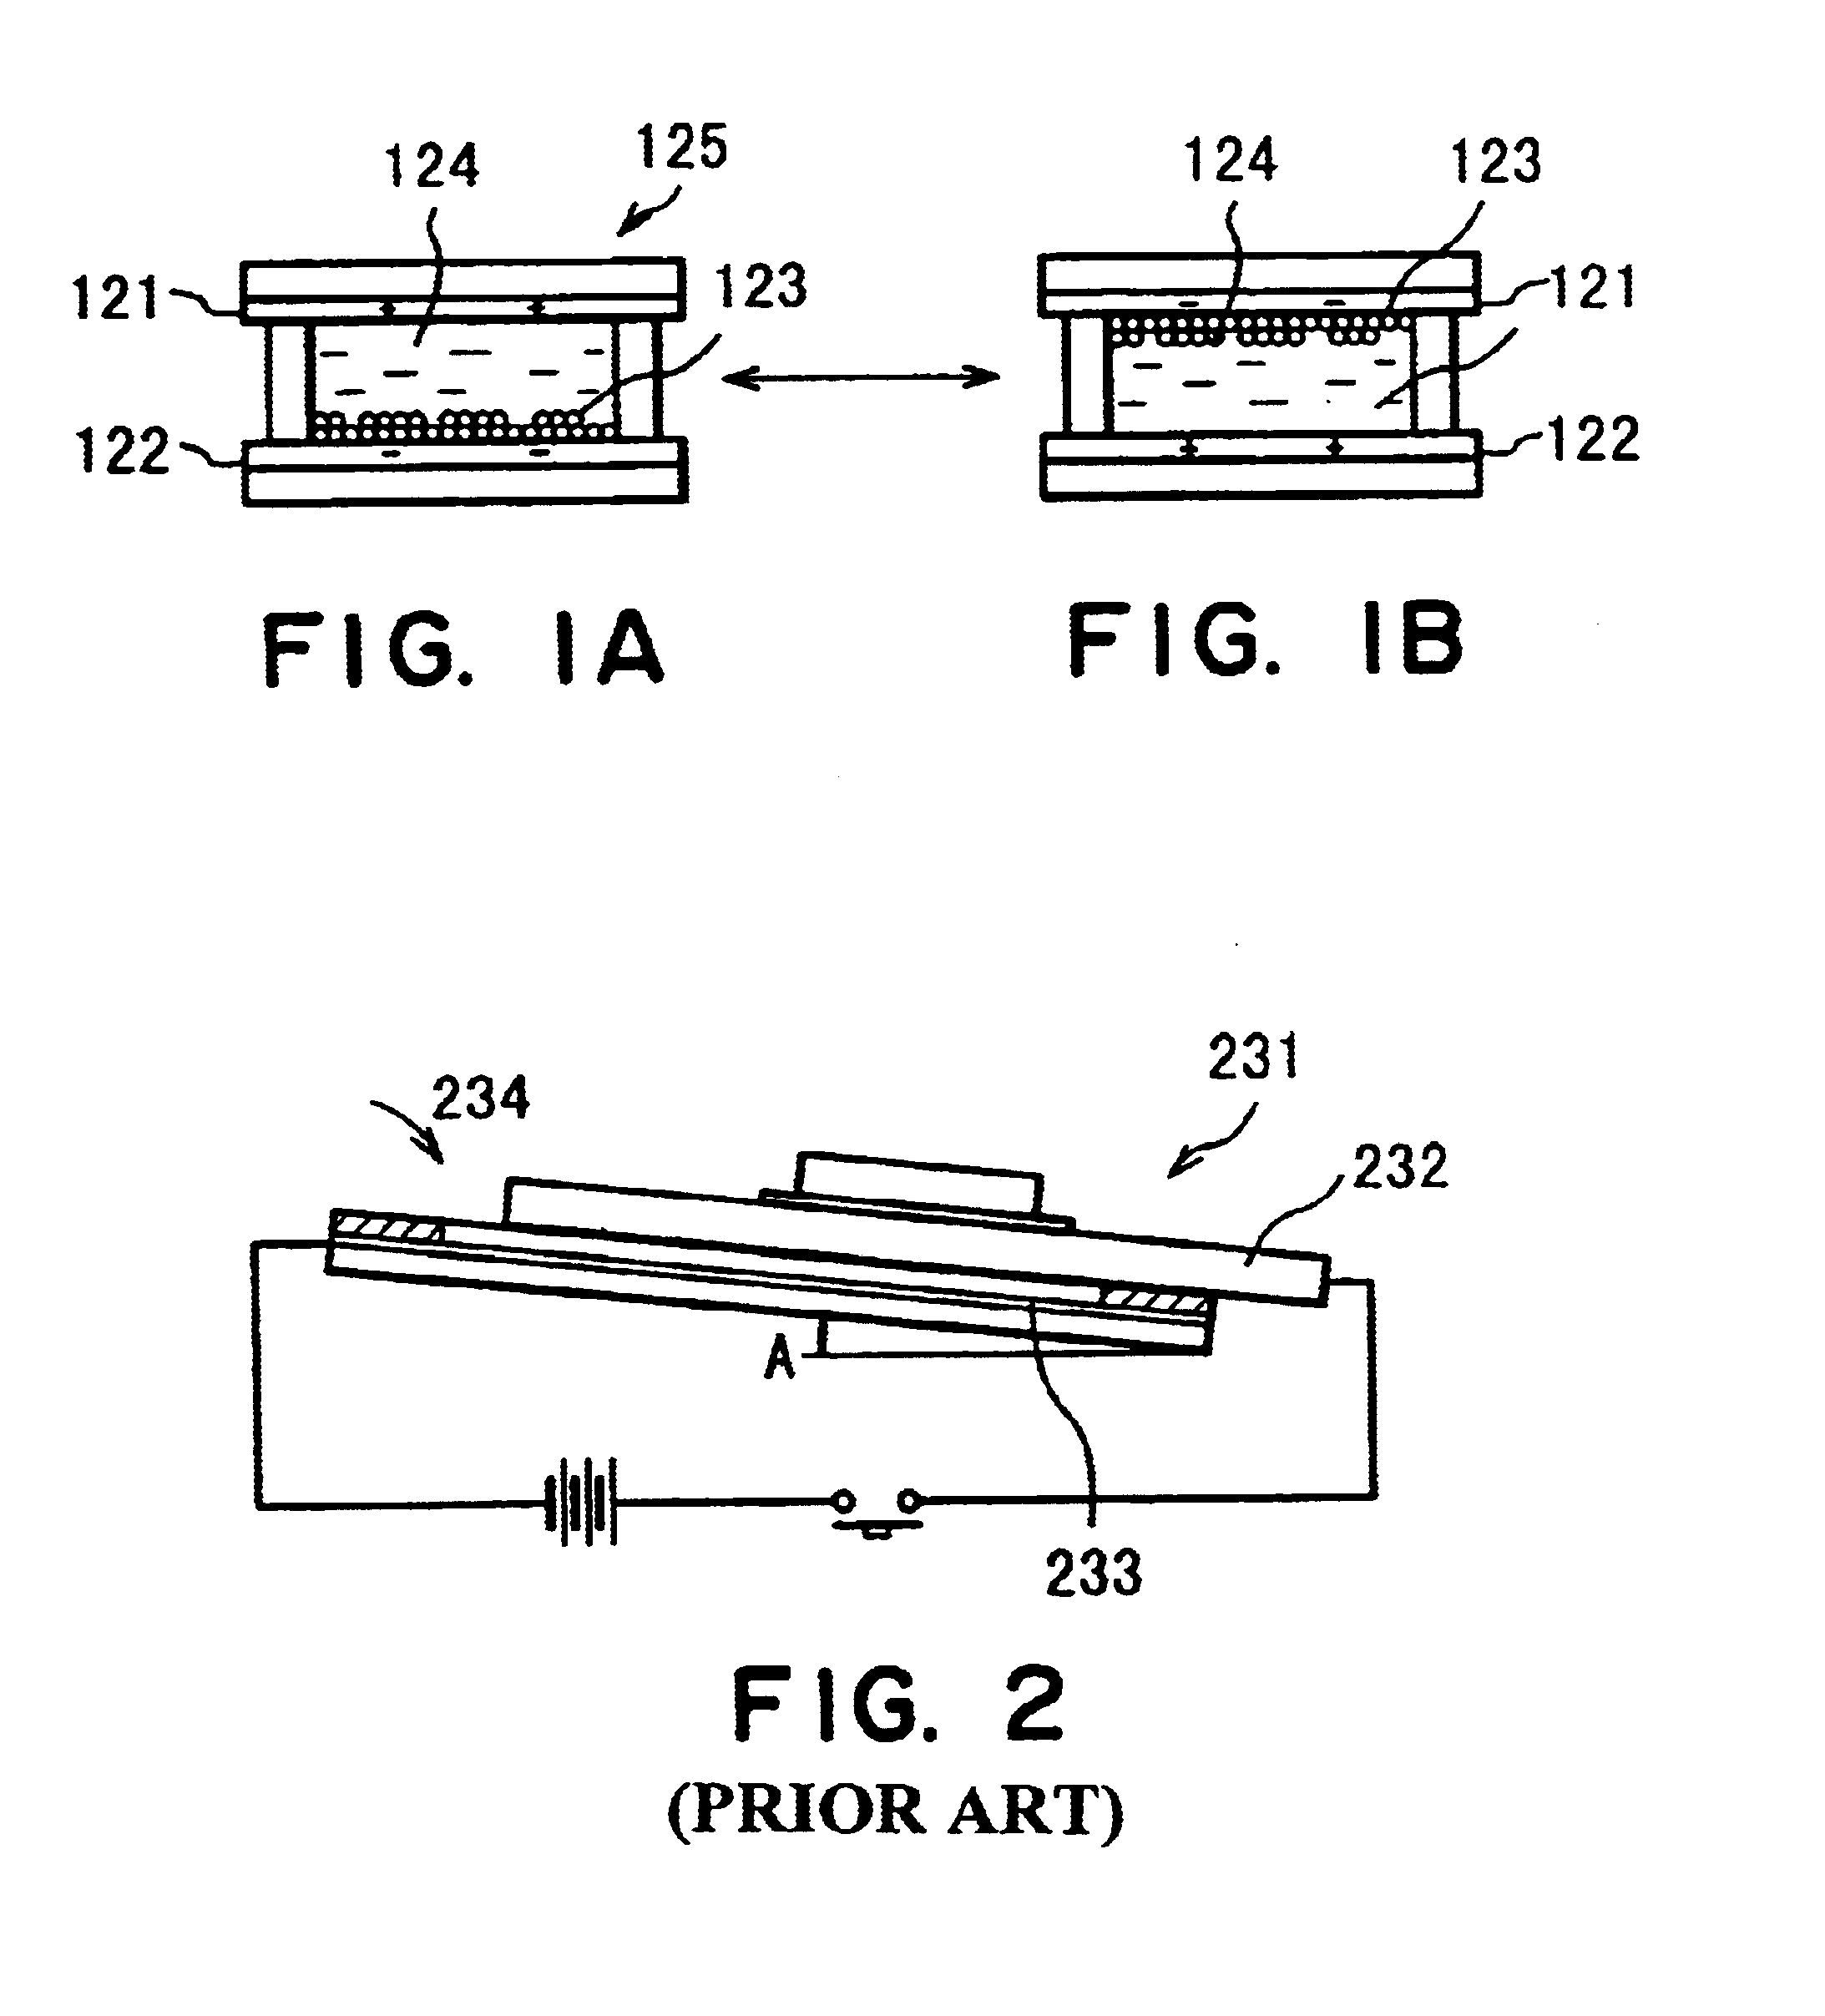 Apparatus and process for producing electrophoretic device